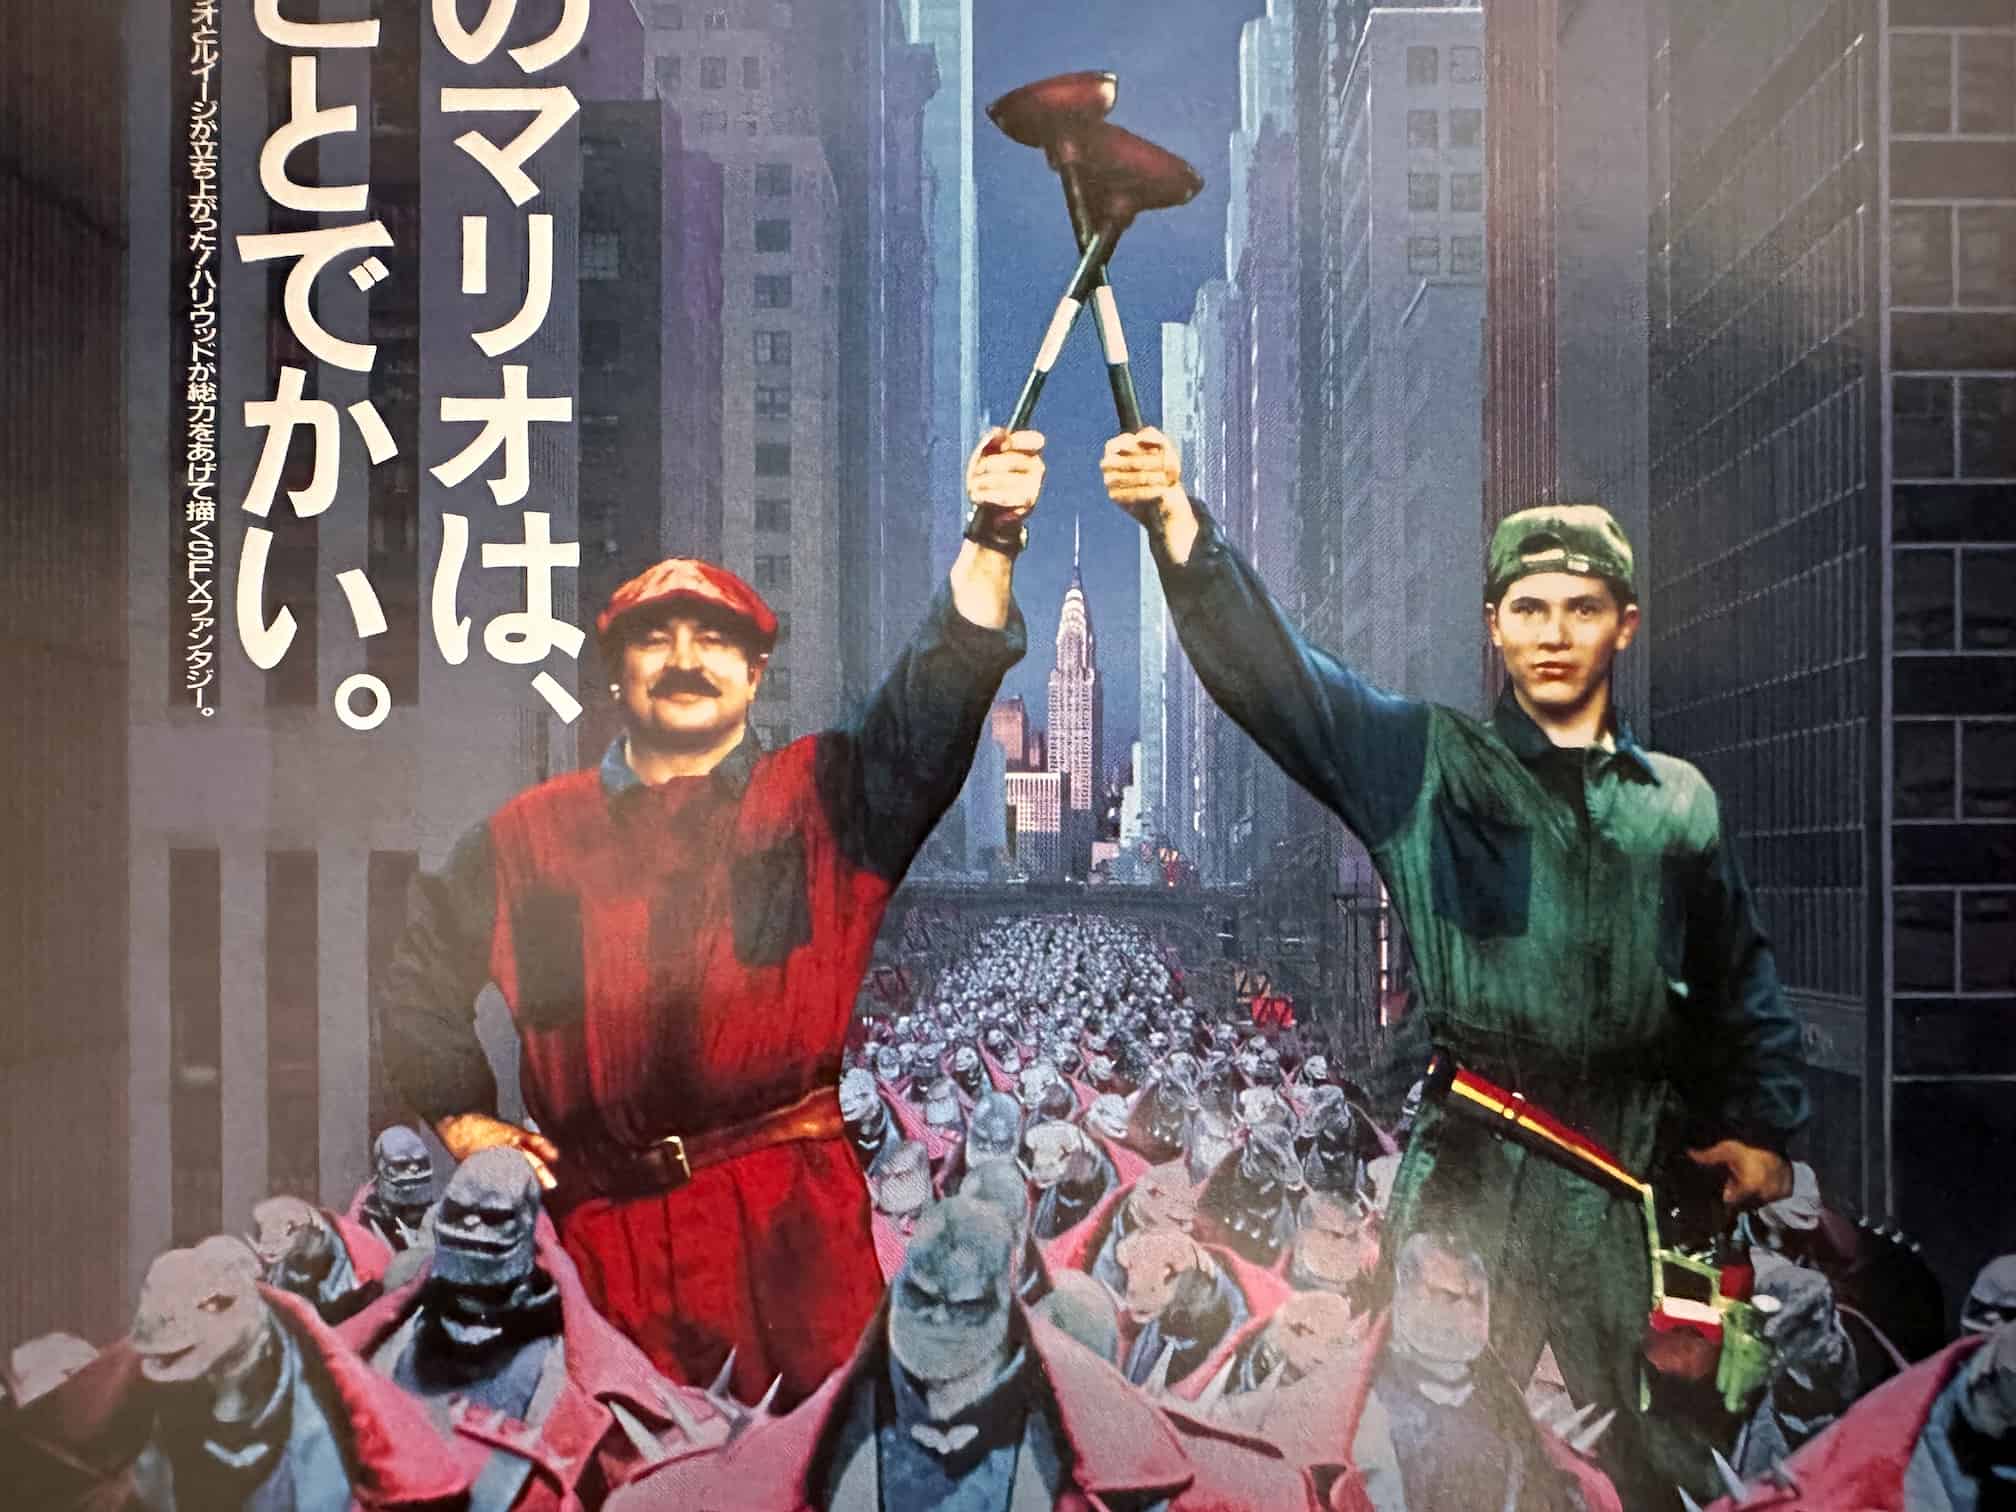 Mario and Luigi crossing their plungers in the air like swords.